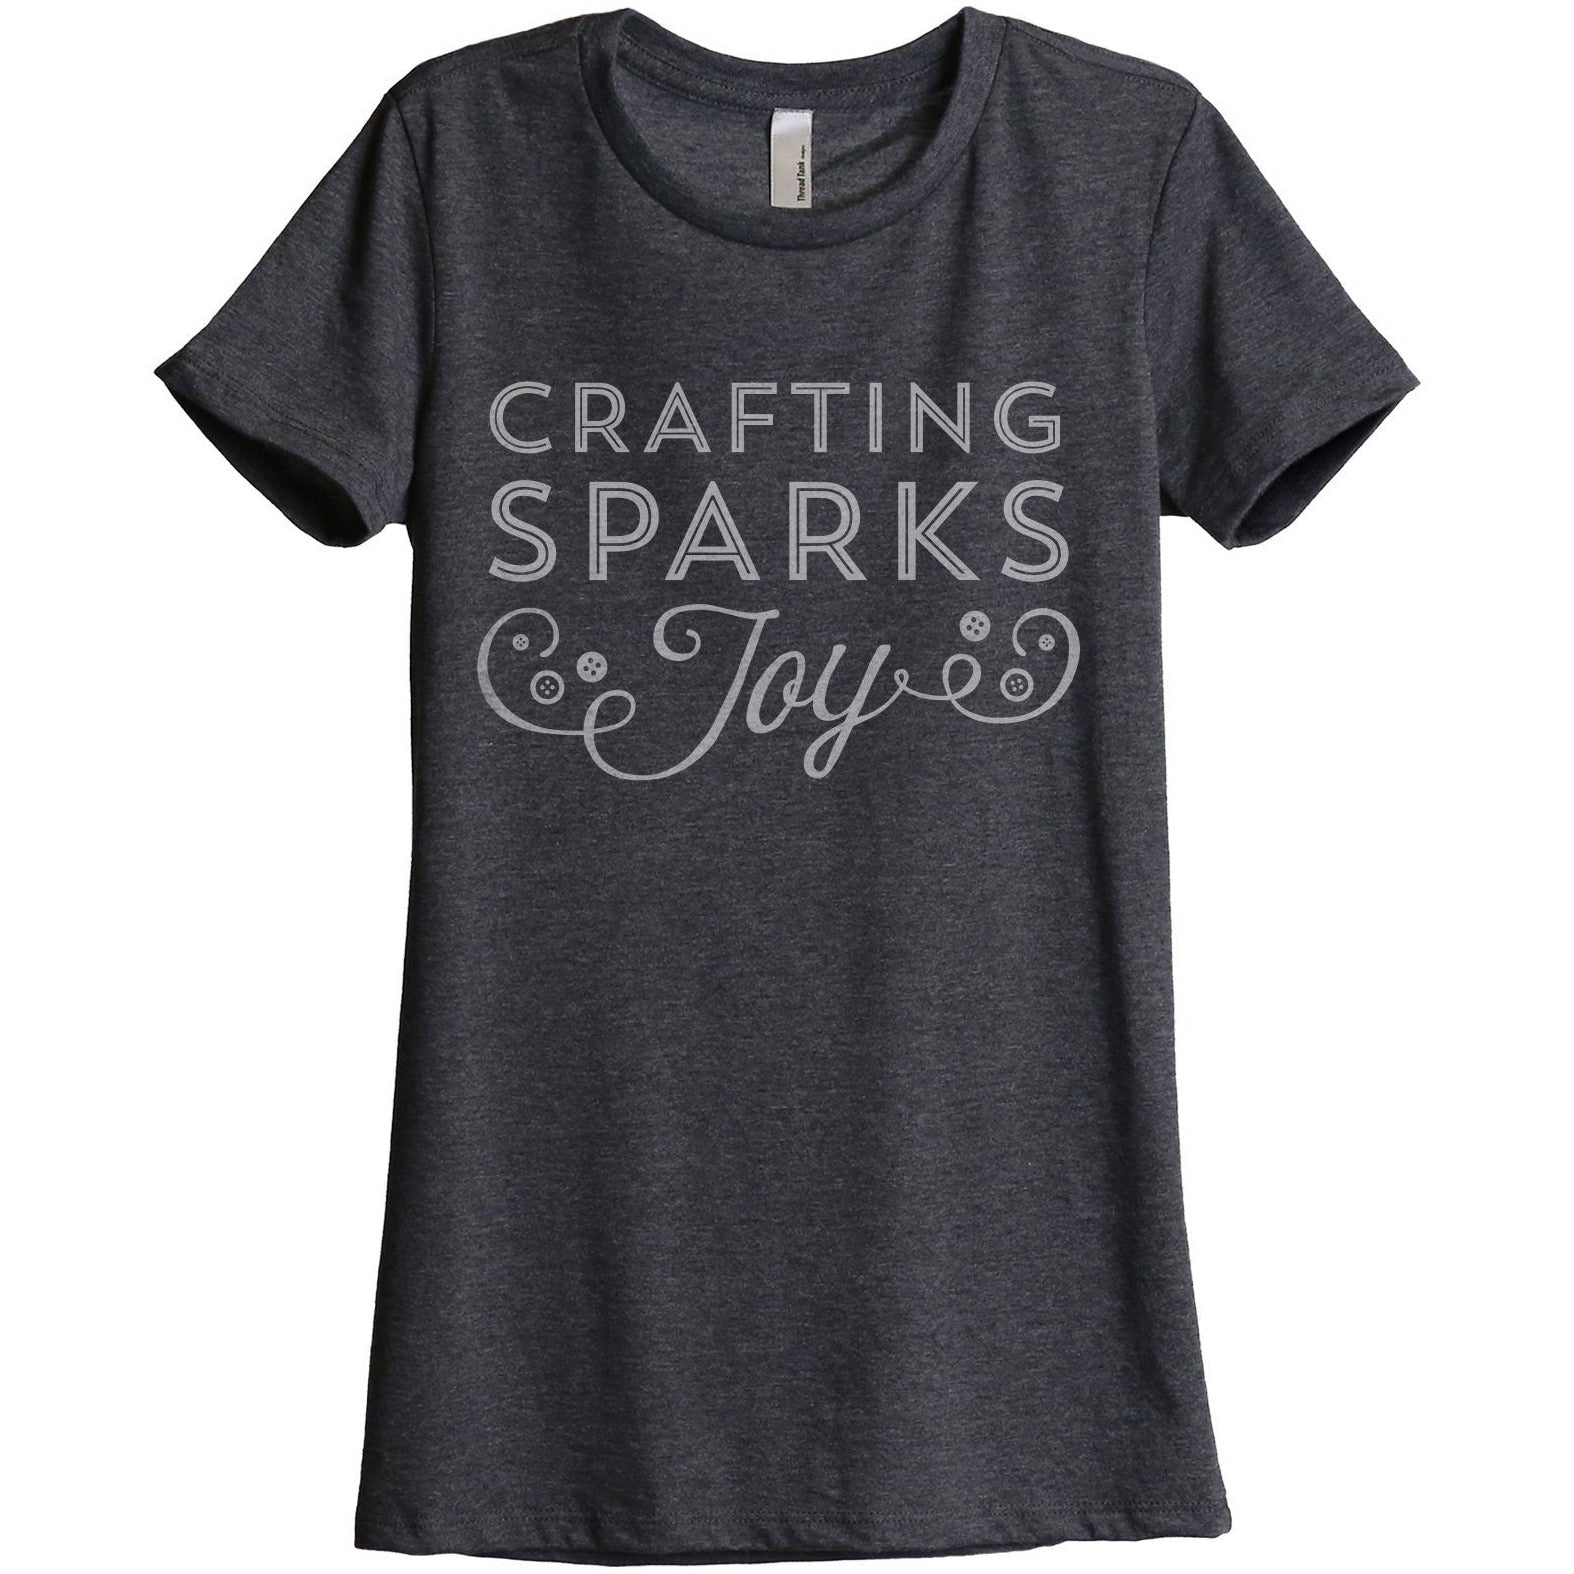 Crafting Sparks Joy Women's Relaxed Crewneck T-Shirt Top Tee Charcoal Grey
